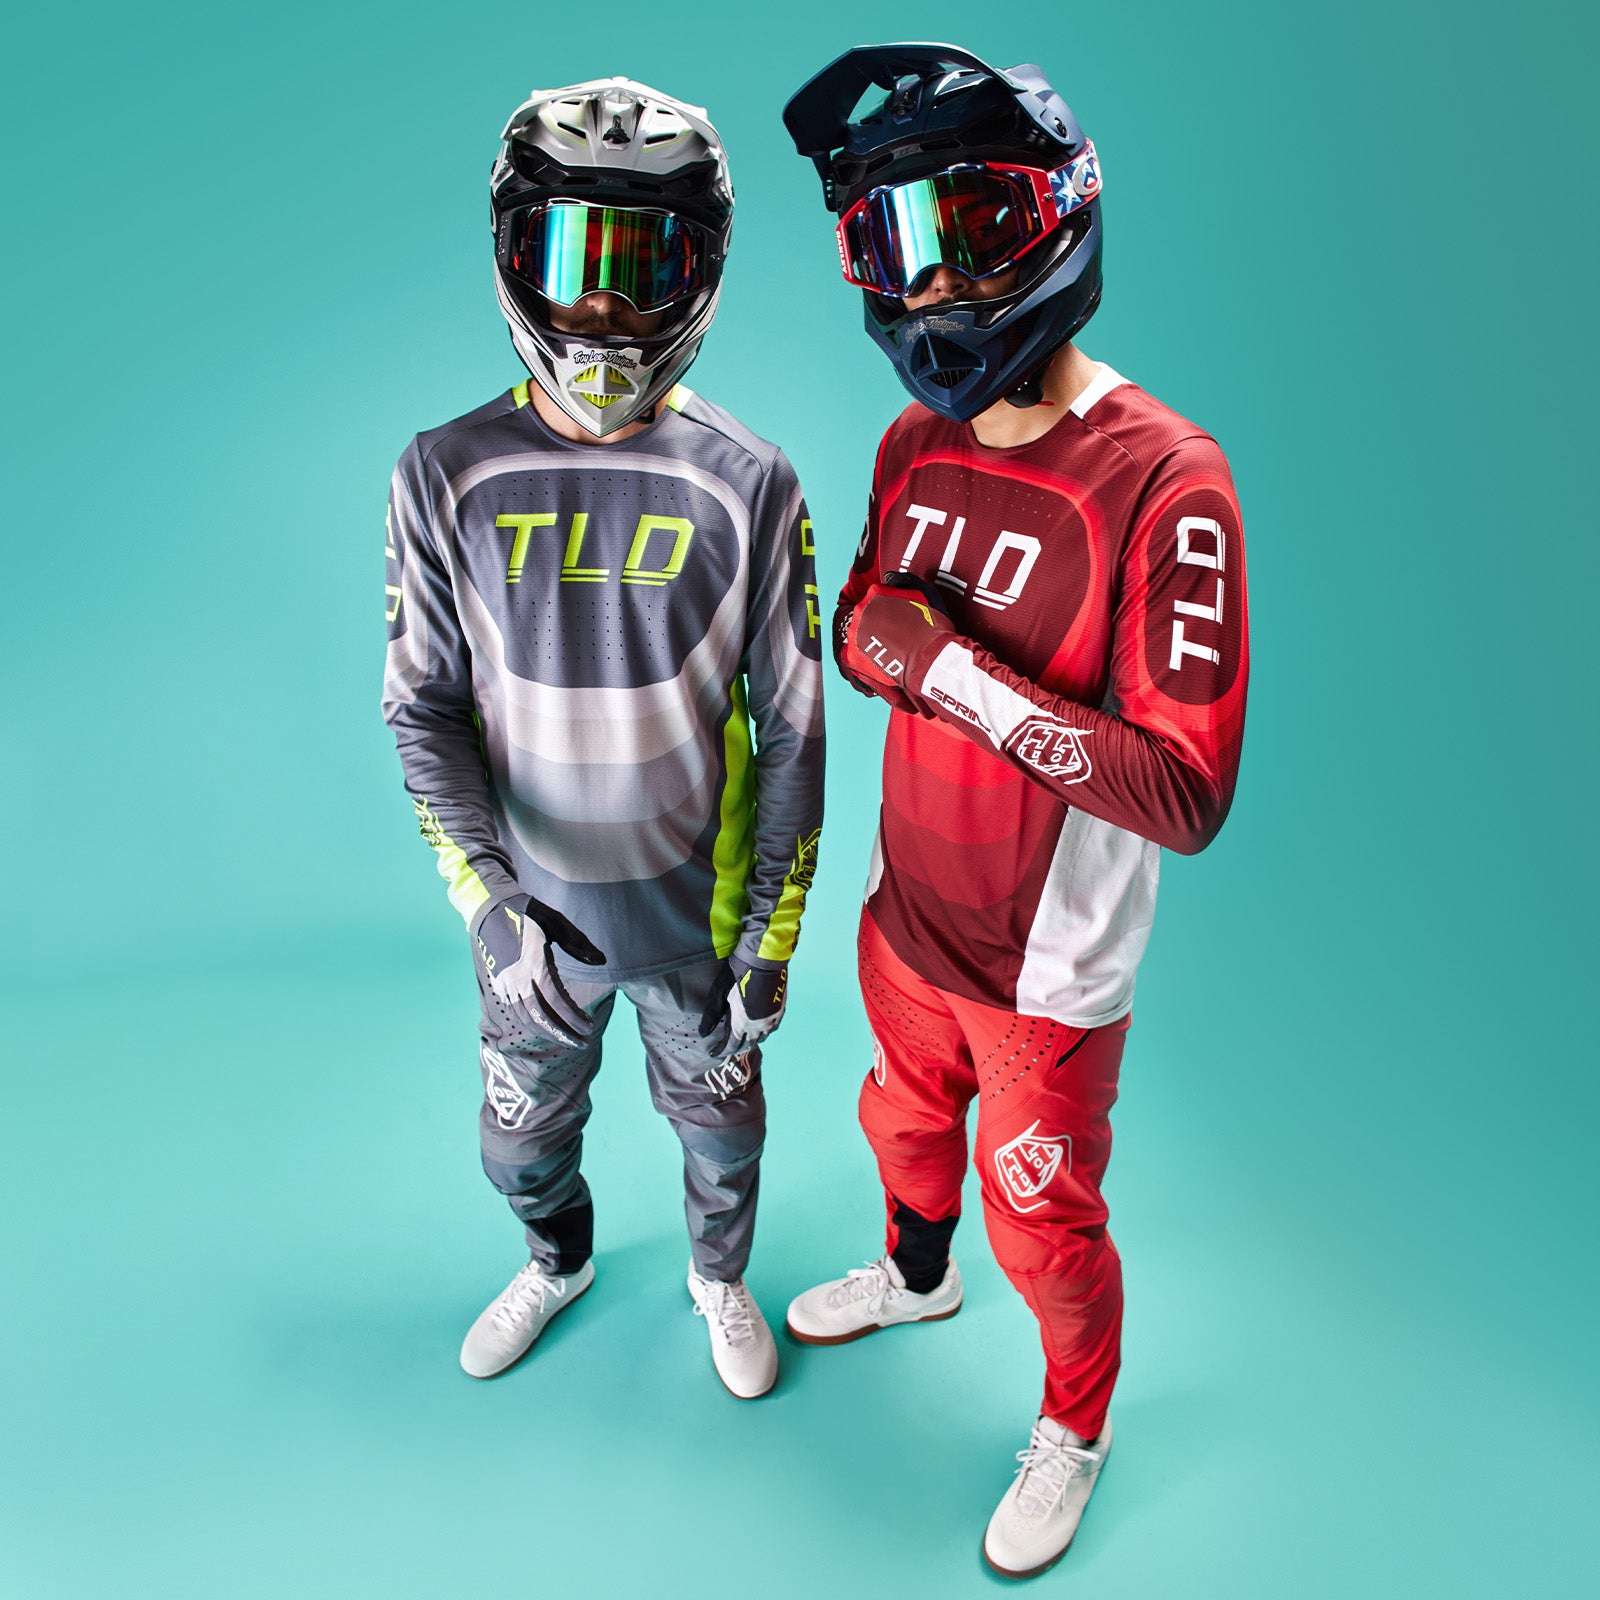 New Troy Lee Designs Sprint bike gear available now